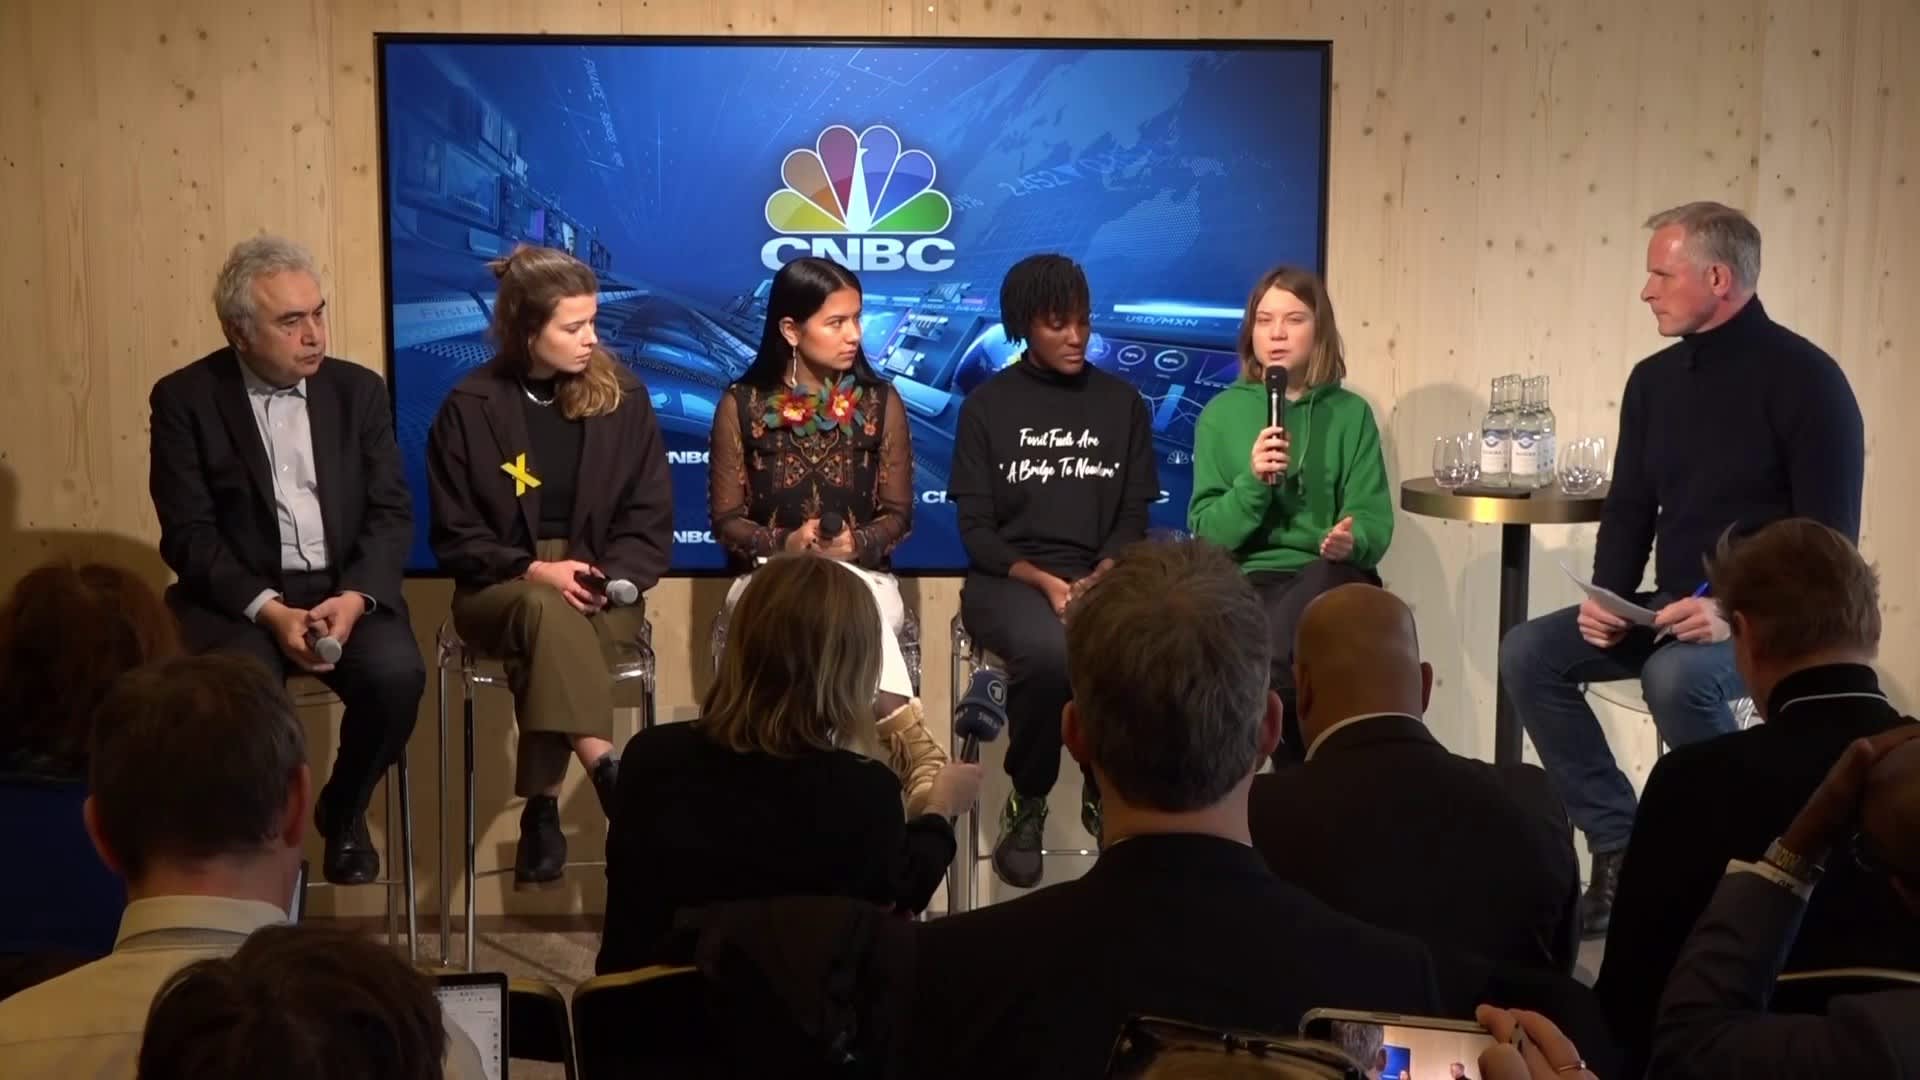 Climate activists Greta Thunberg and Vanessa Nakate share their message to Davos delegates